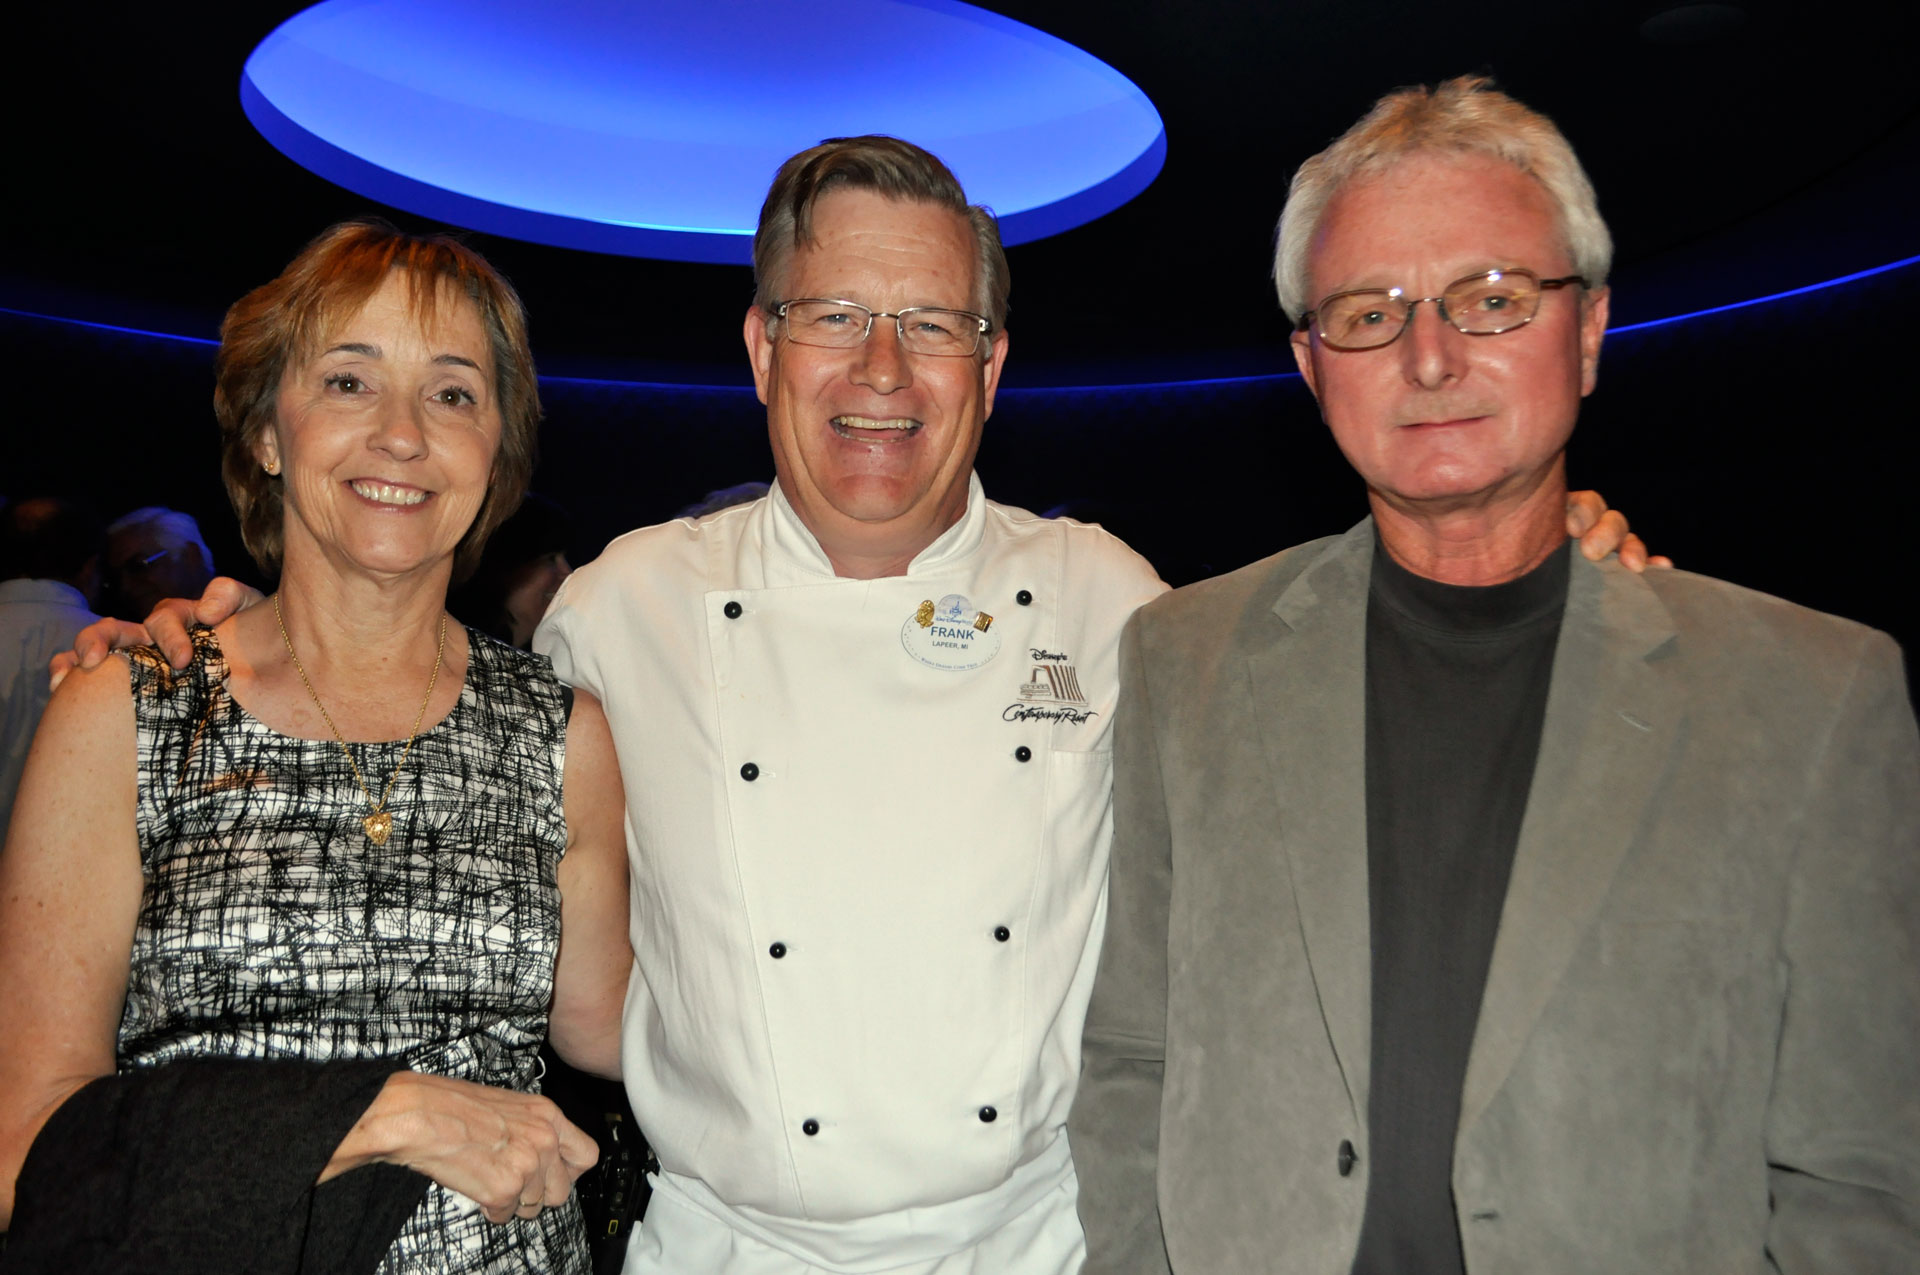 Sandy Lott, Chef Frank Brough and Mike Lott